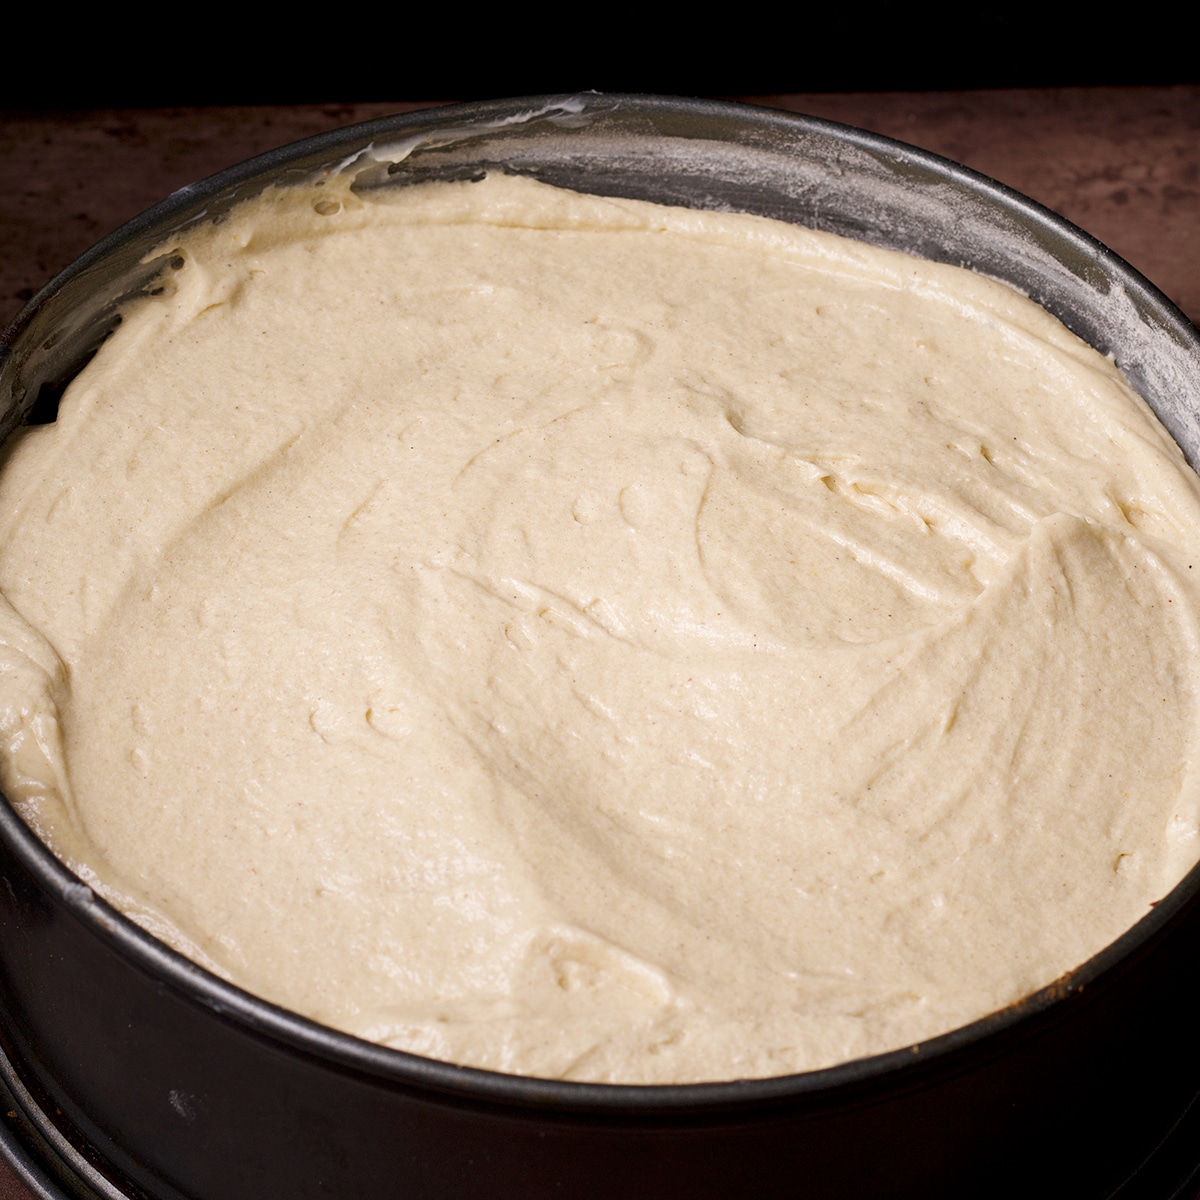 A springform pan filled with cake batter.